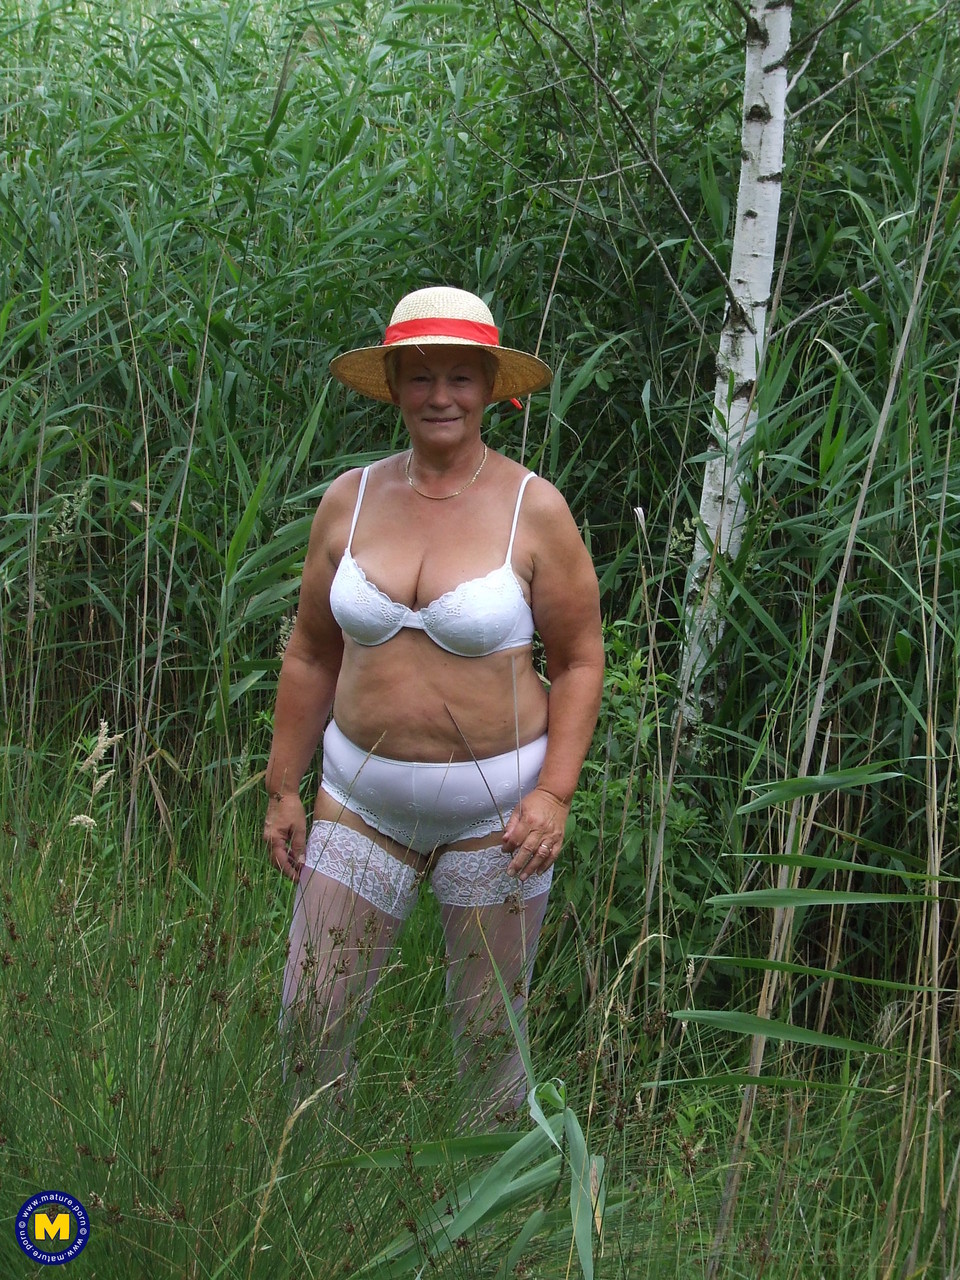 Wild chubby granny Gisela strips to her stockings outdoors & spreads her cunt